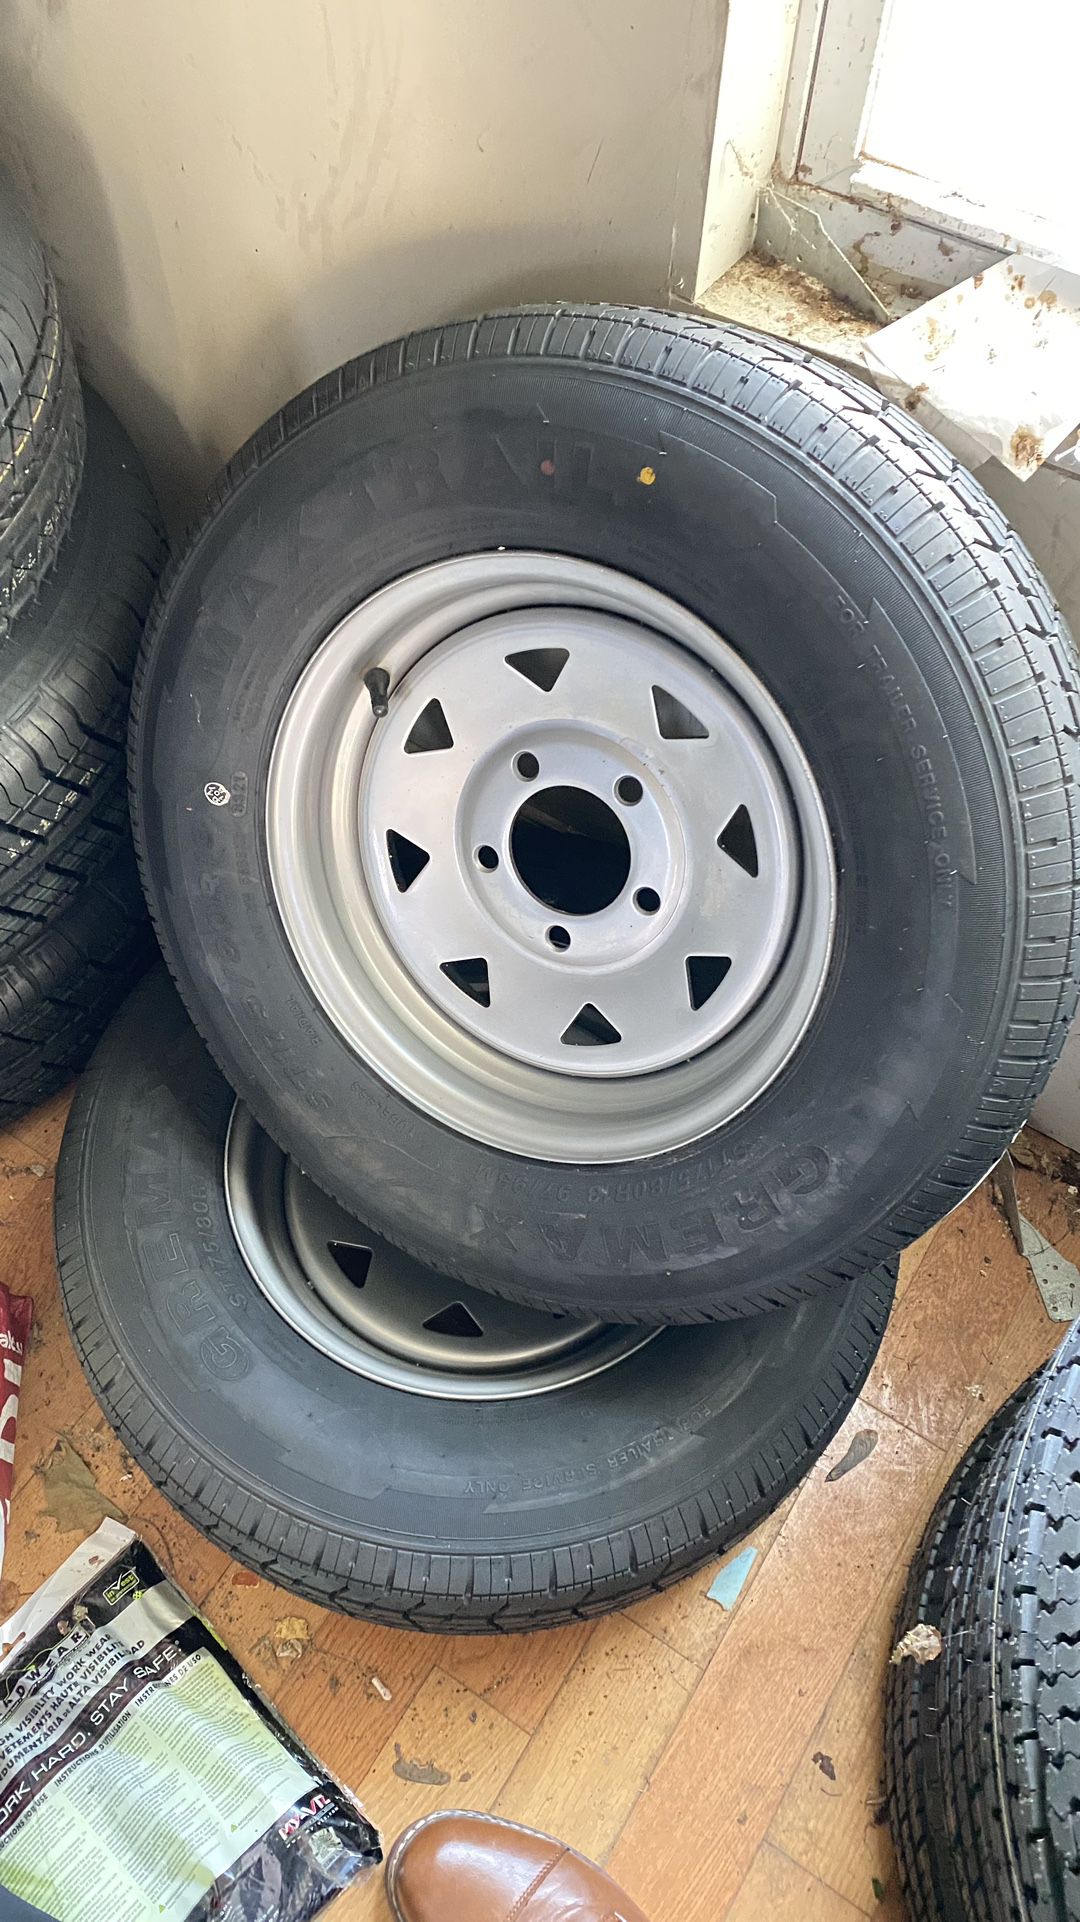 175/80/13 Tow Dolly or Trailer tires